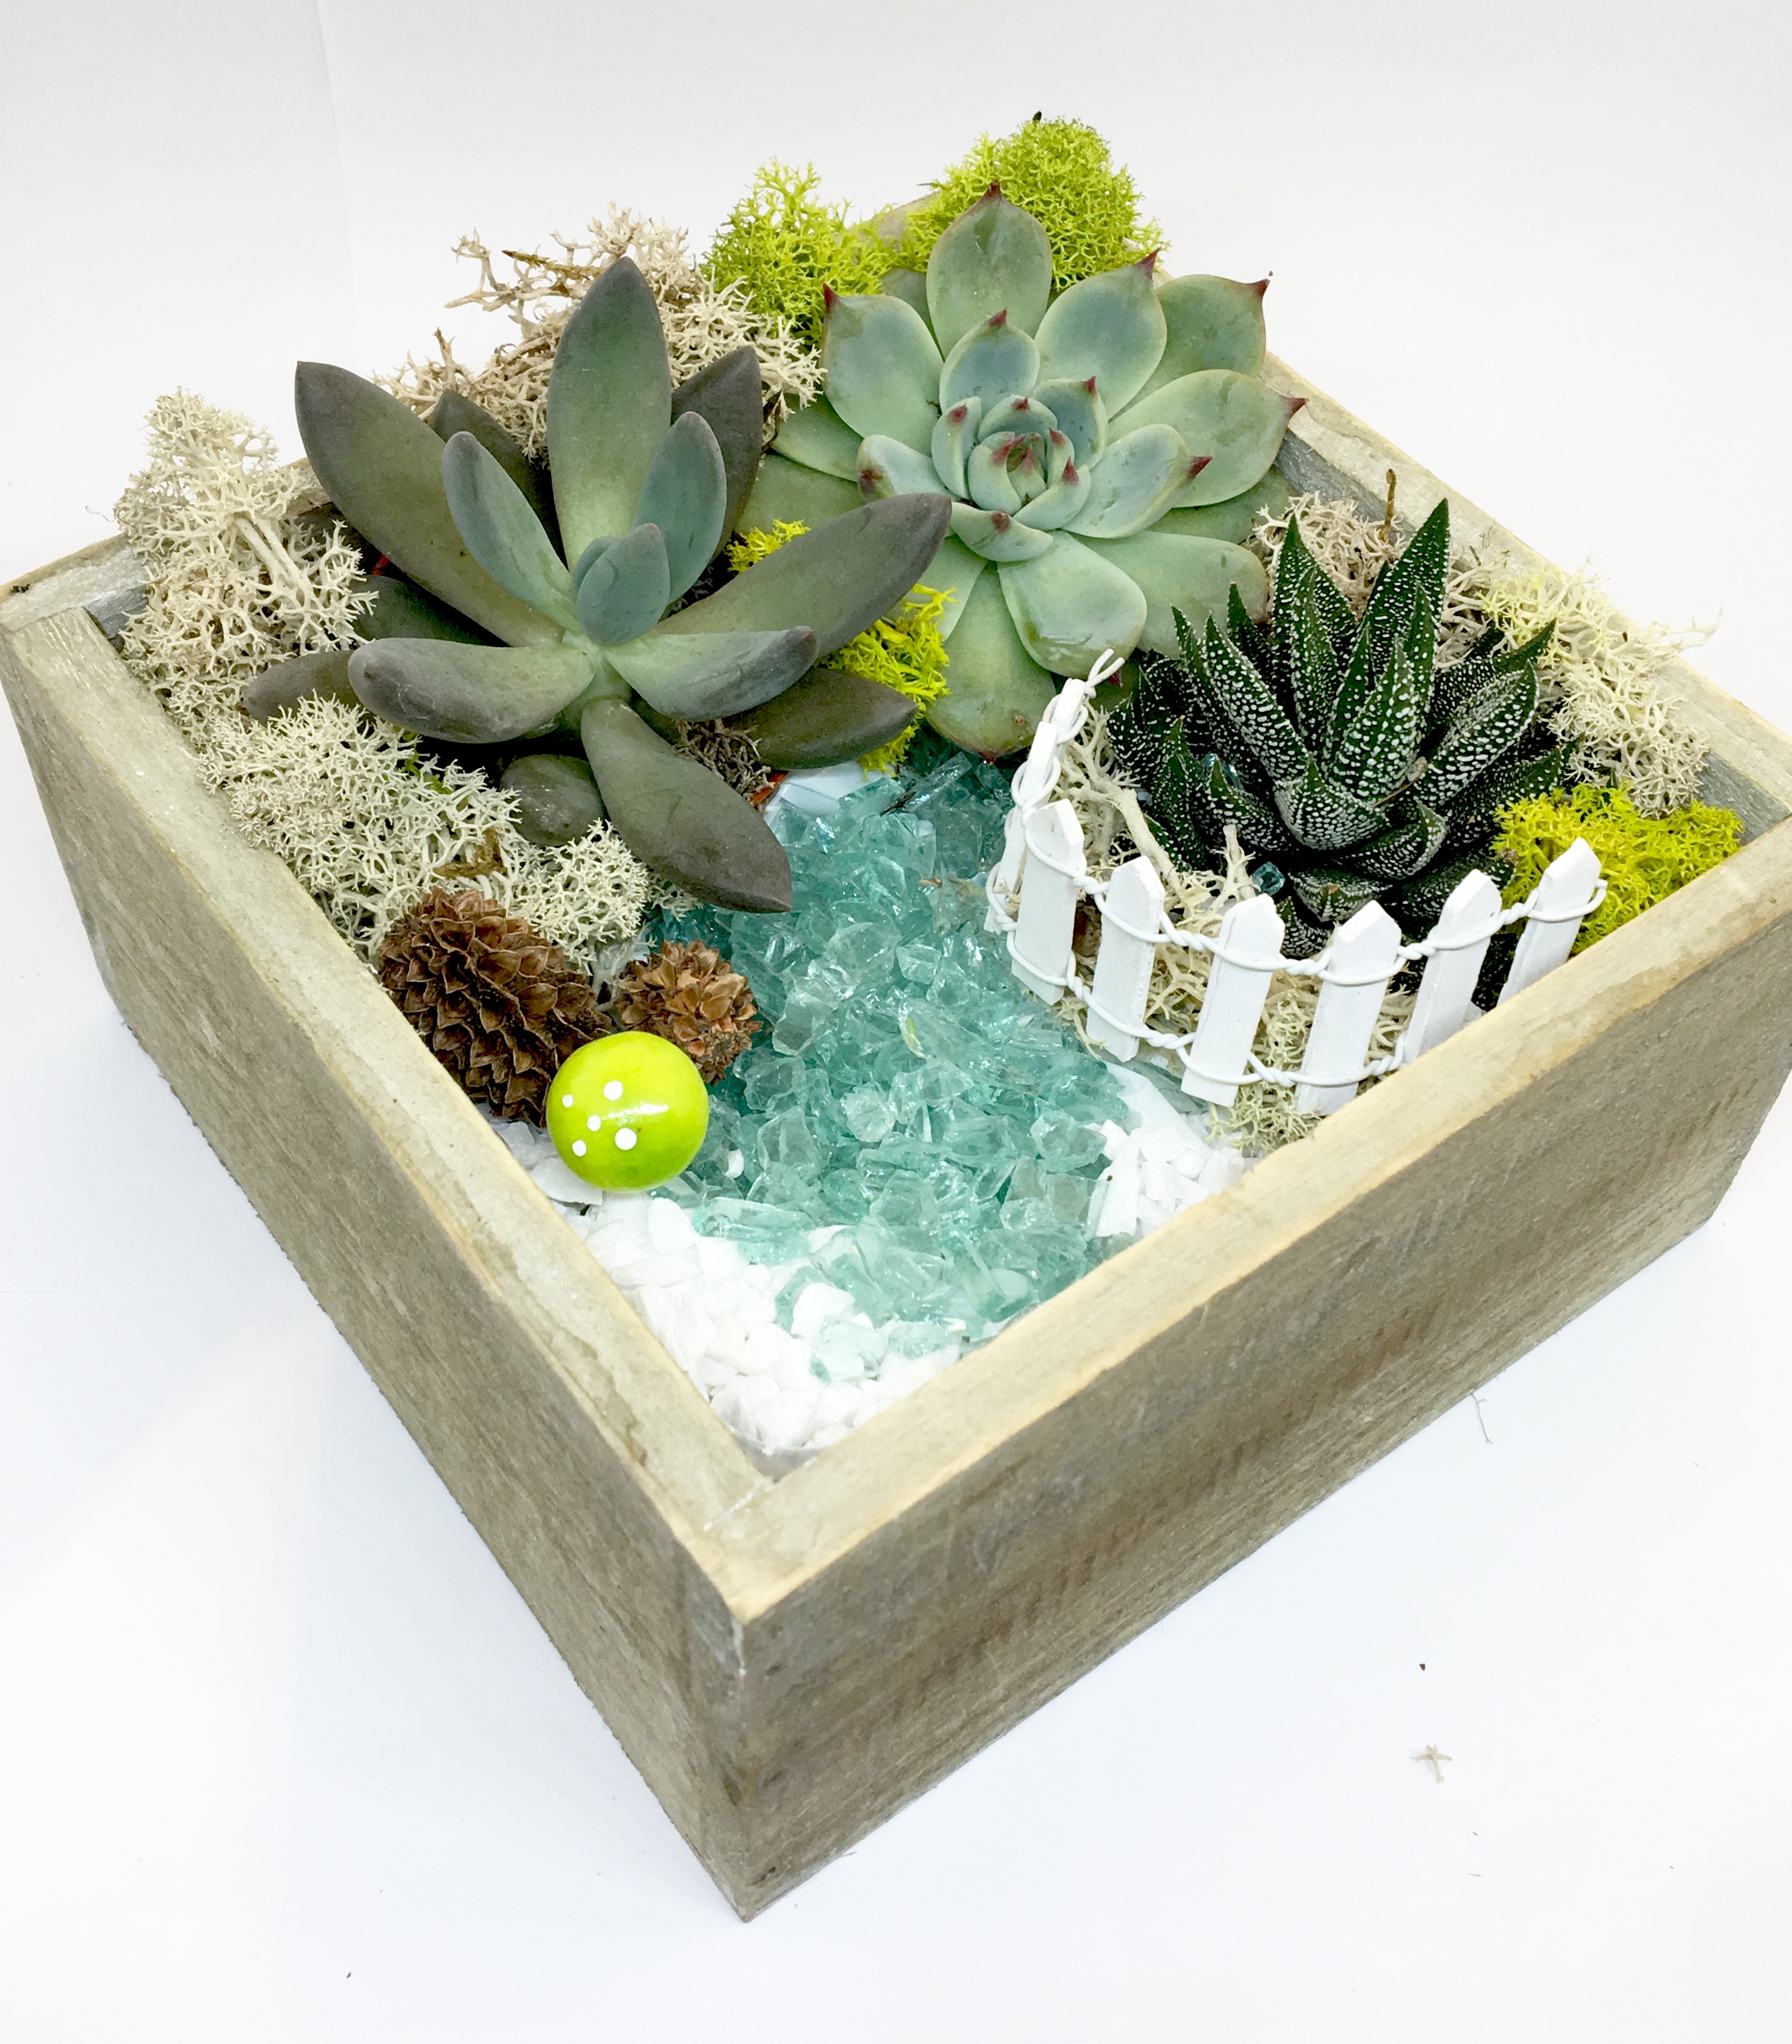 A Natural Wood Square plant nite project by Yaymaker